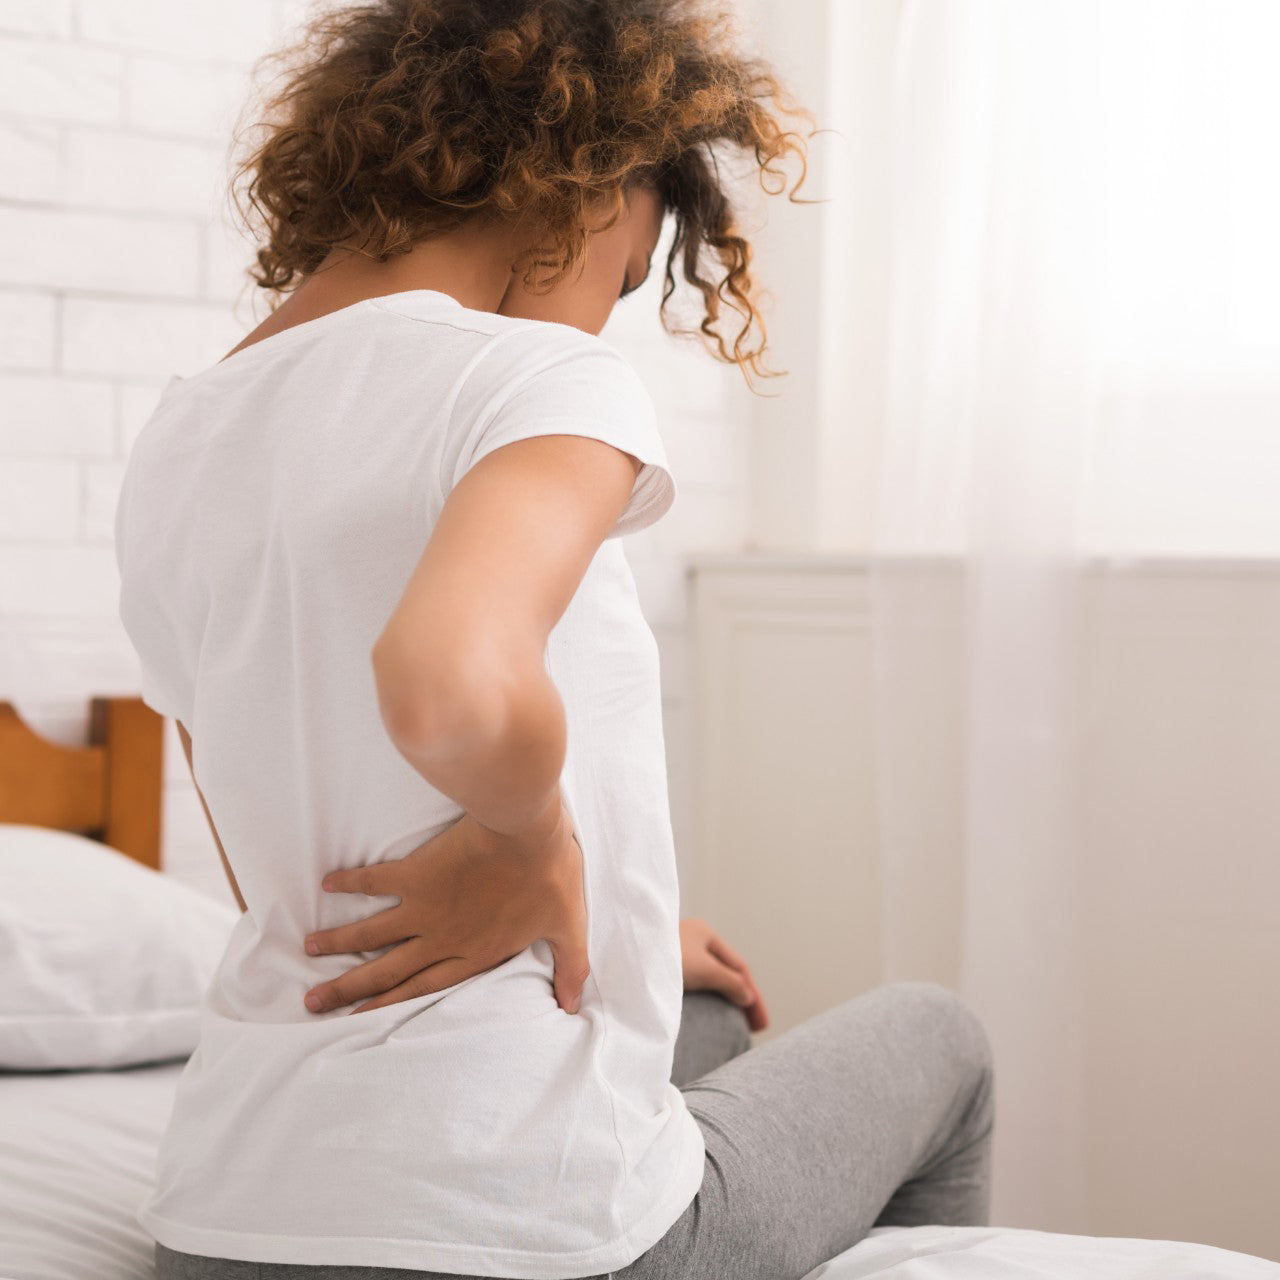 How Can I Self-Manage My Lower Back Pain?